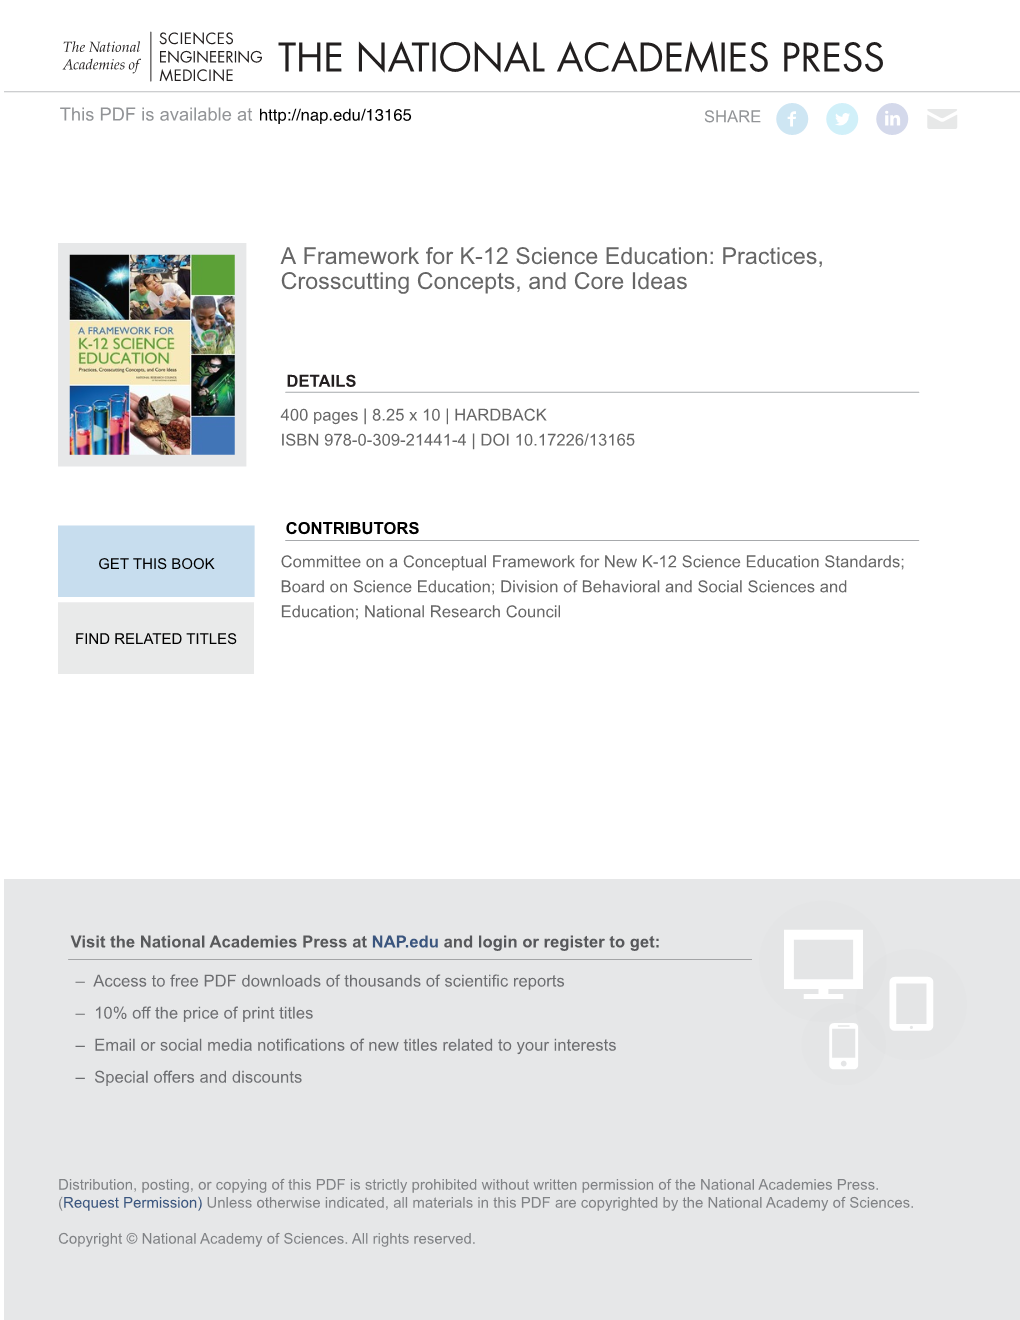 A Framework for K-12 Science Education: Practices, Crosscutting Concepts, and Core Ideas